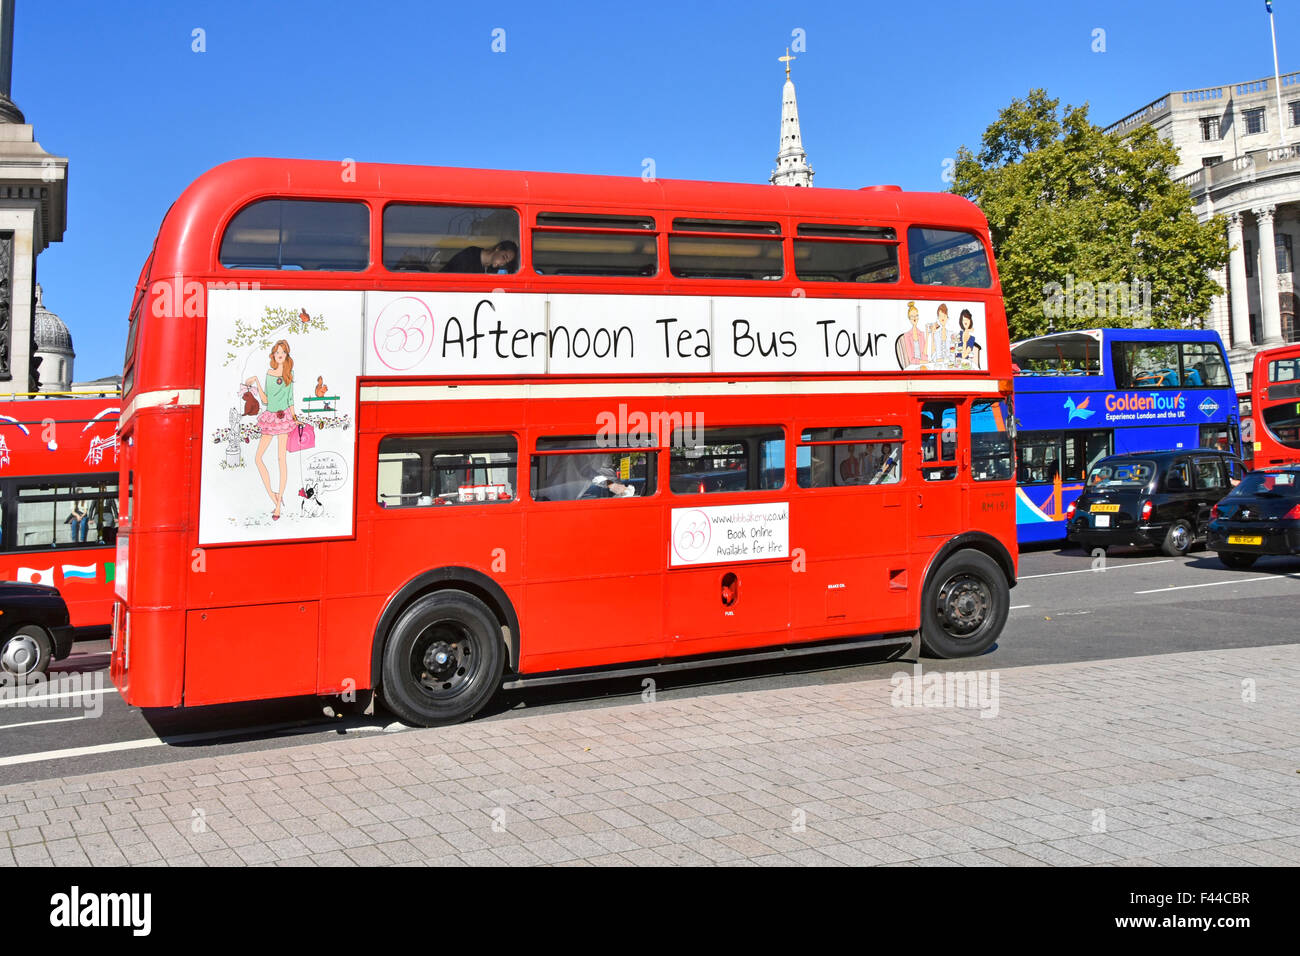 'Afternoon Tea' tour onboard the iconic London double decker red Routemaster bus seen in Trafalgar Square London England UK Stock Photo